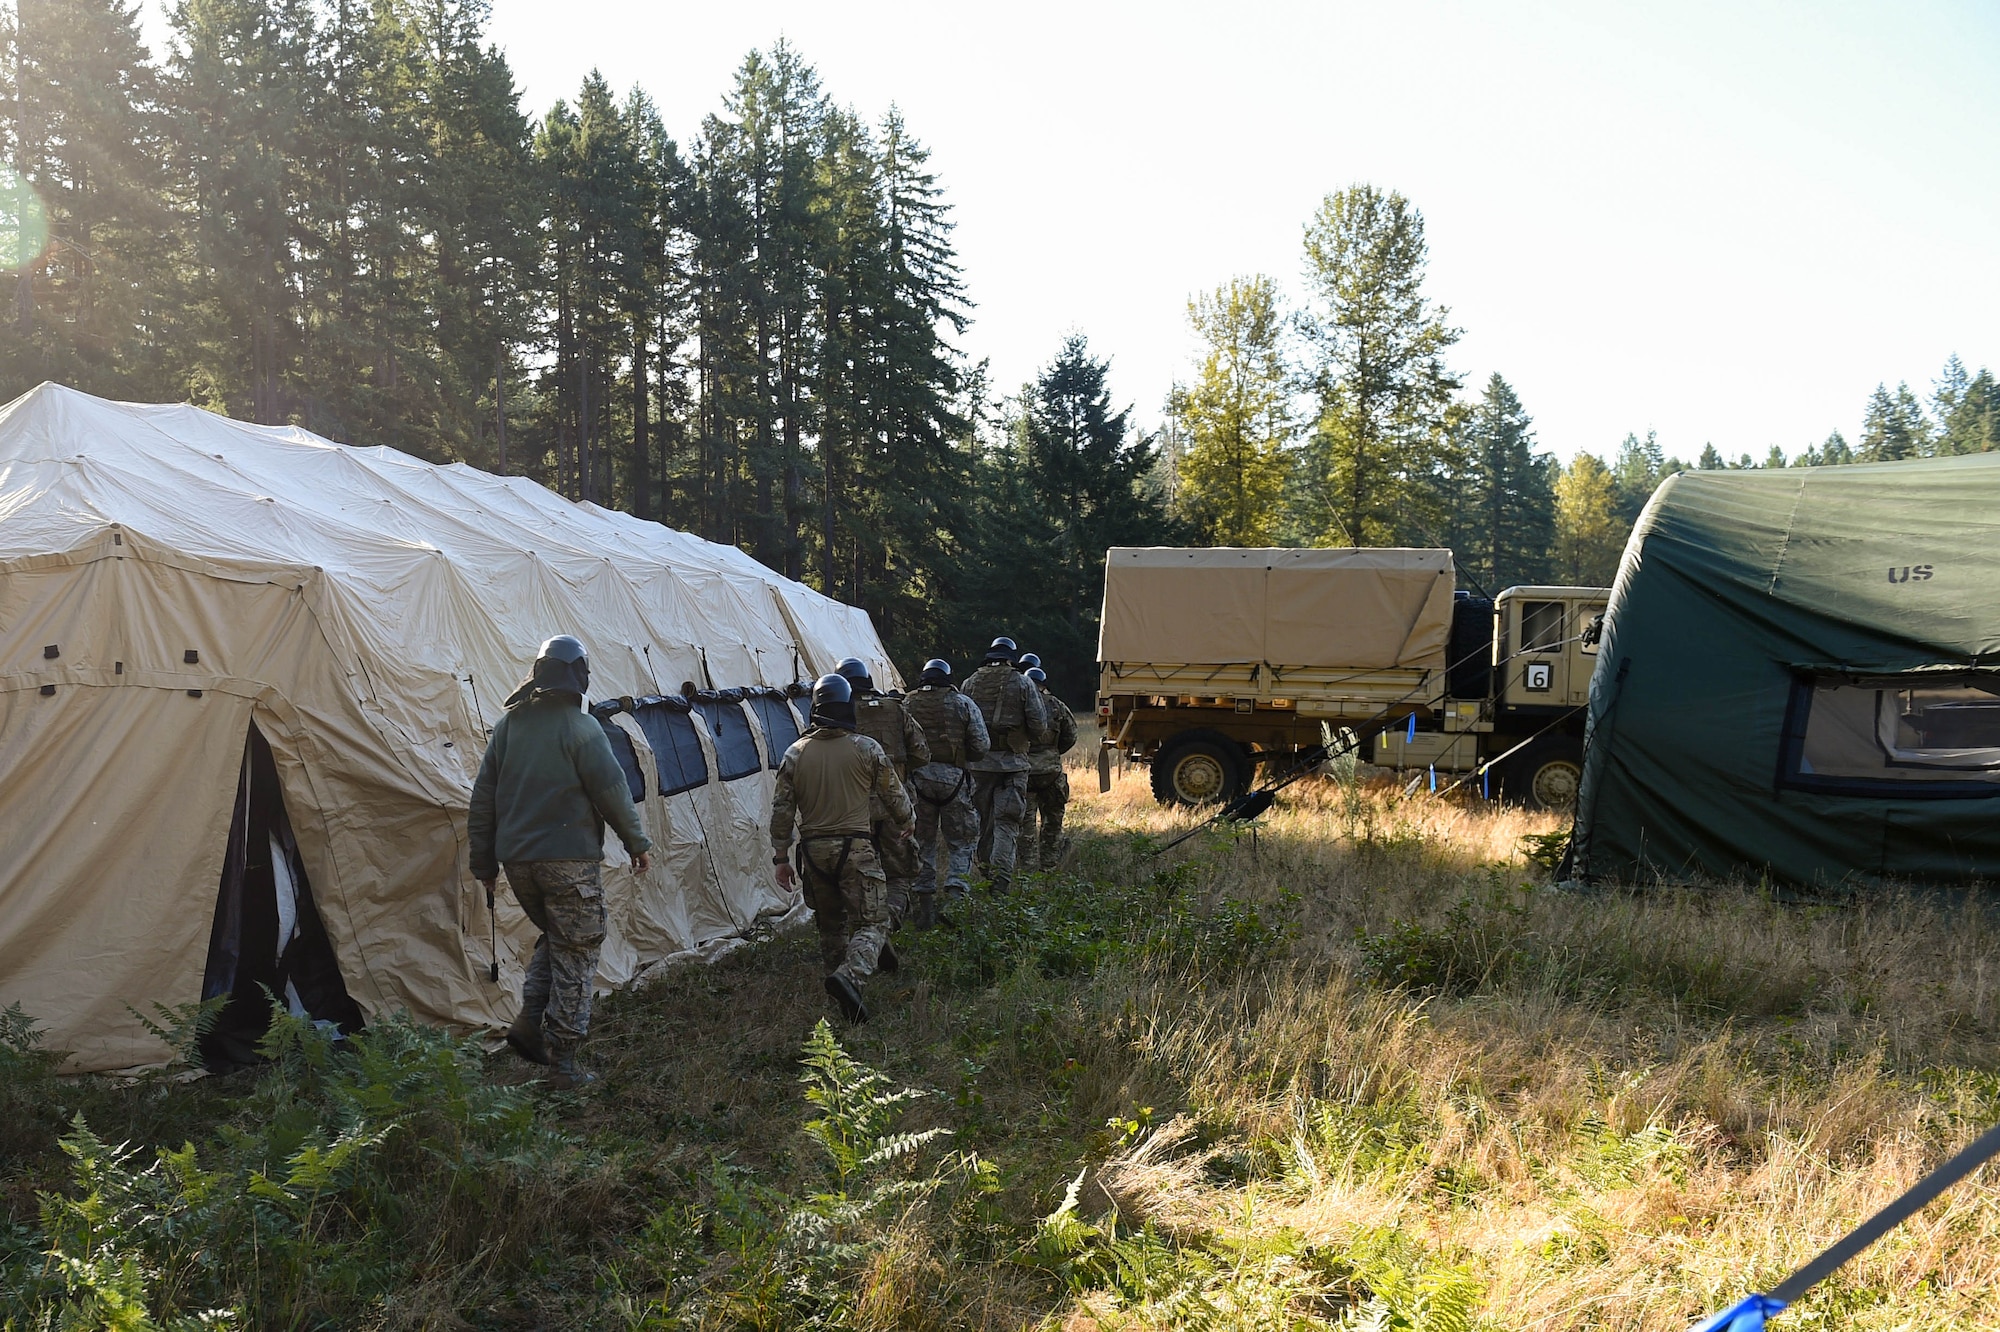 A team of five tactical air control party (TACP) officer candidates move towards a mock-deployment tactical village to complete a combat leadership objective challenge as part of TOPT selection course phase II on Joint Base Lewis-McChord, Wash., Aug. 27, 2019. TOPT is the selection process for officers who want to join the TACP career field in the U.S. Air Force.